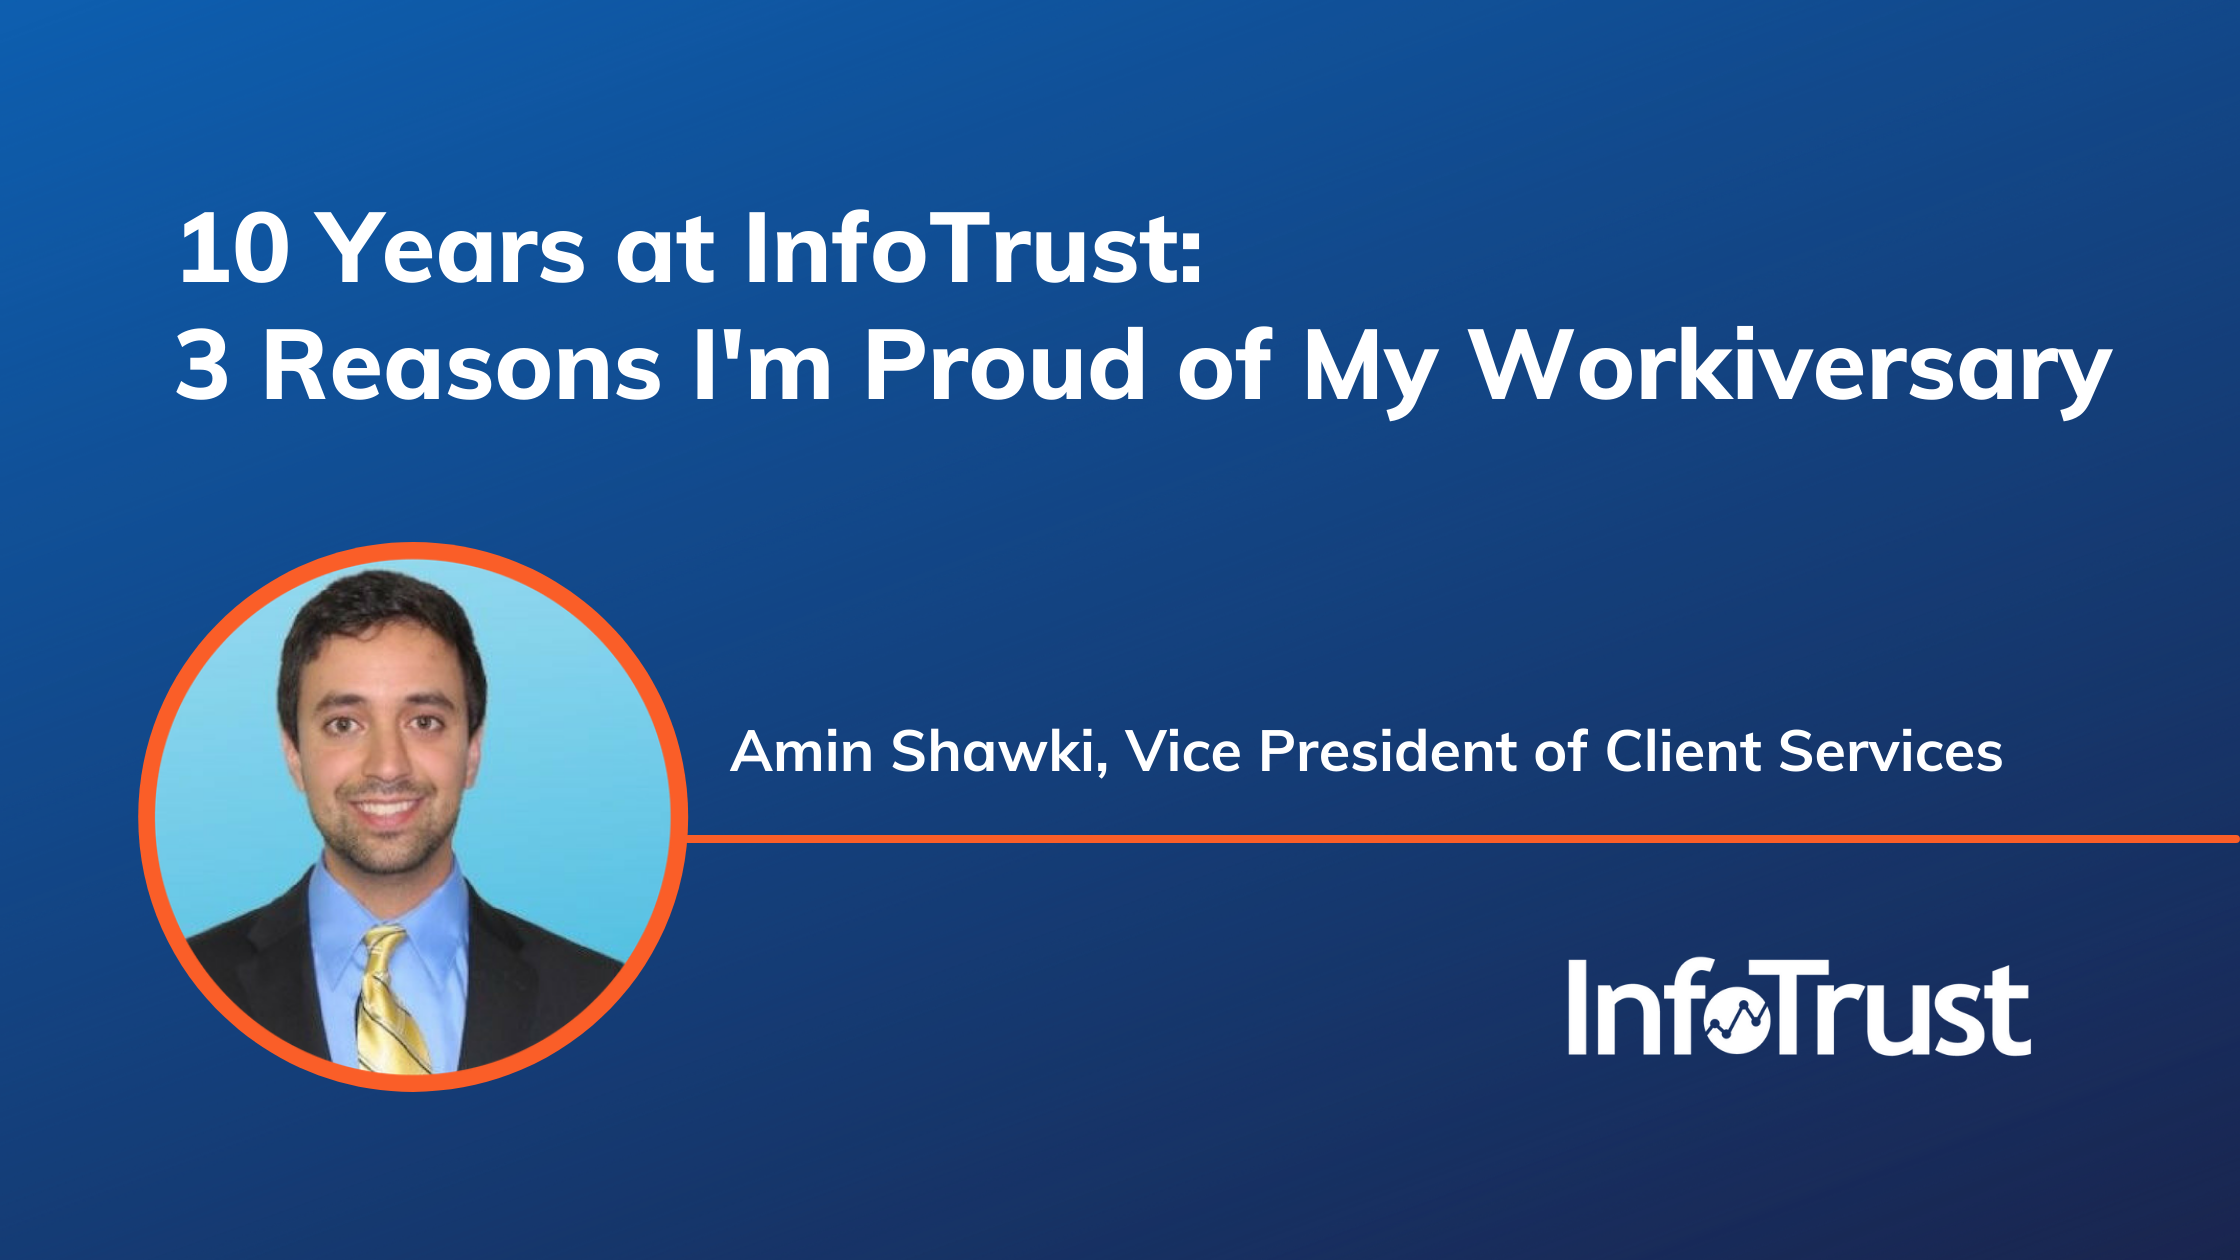 10 Years at InfoTrust: 3 Reasons I’m Proud of My Workiversary